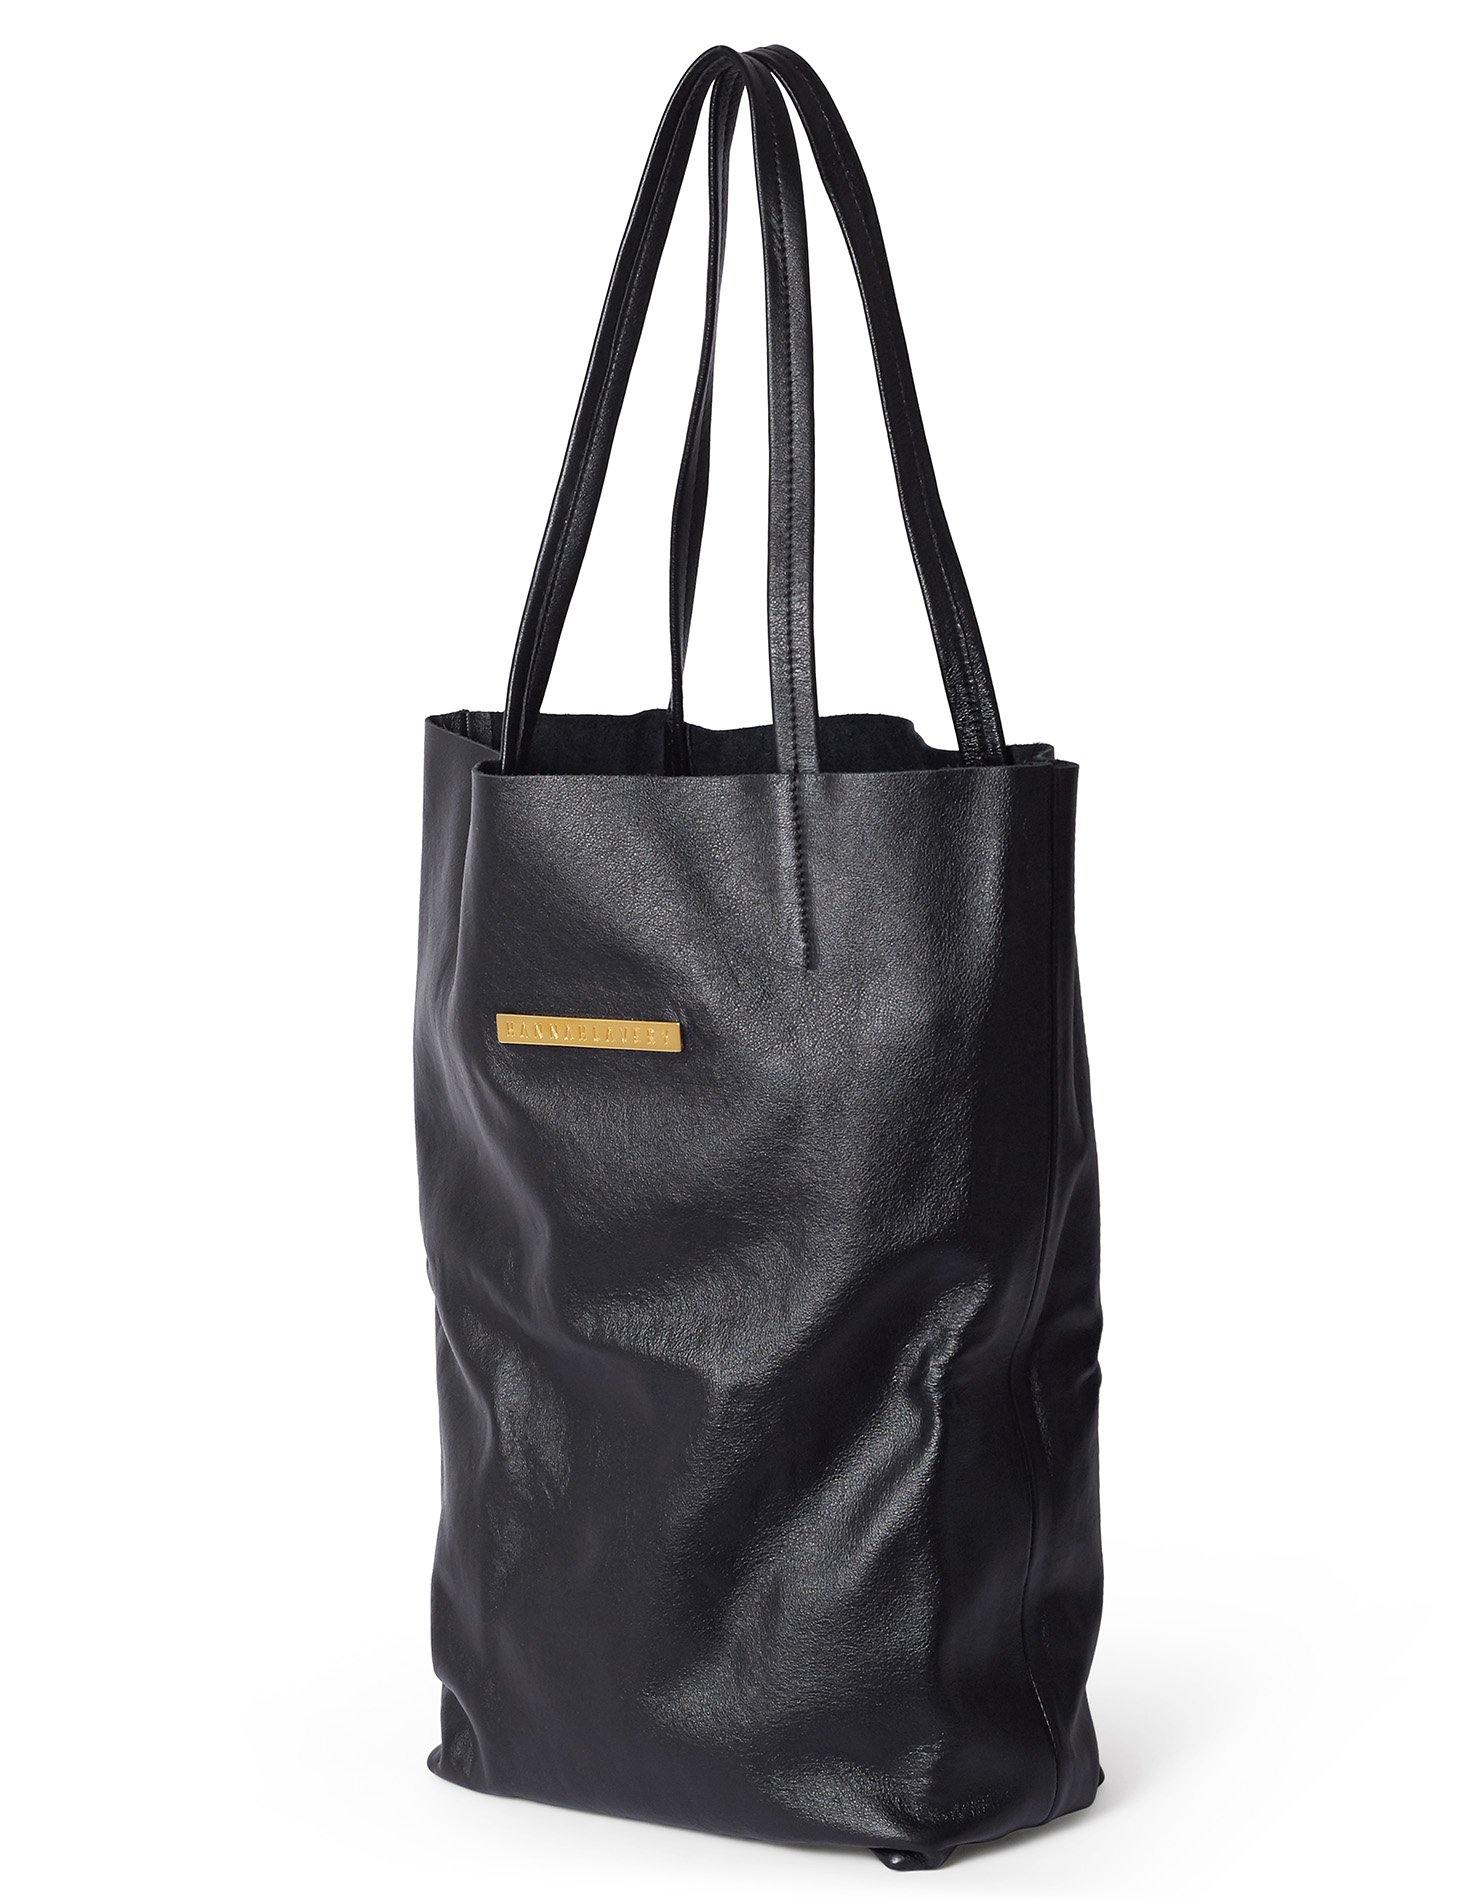 Leather Tote Bag - Hannah Lavery